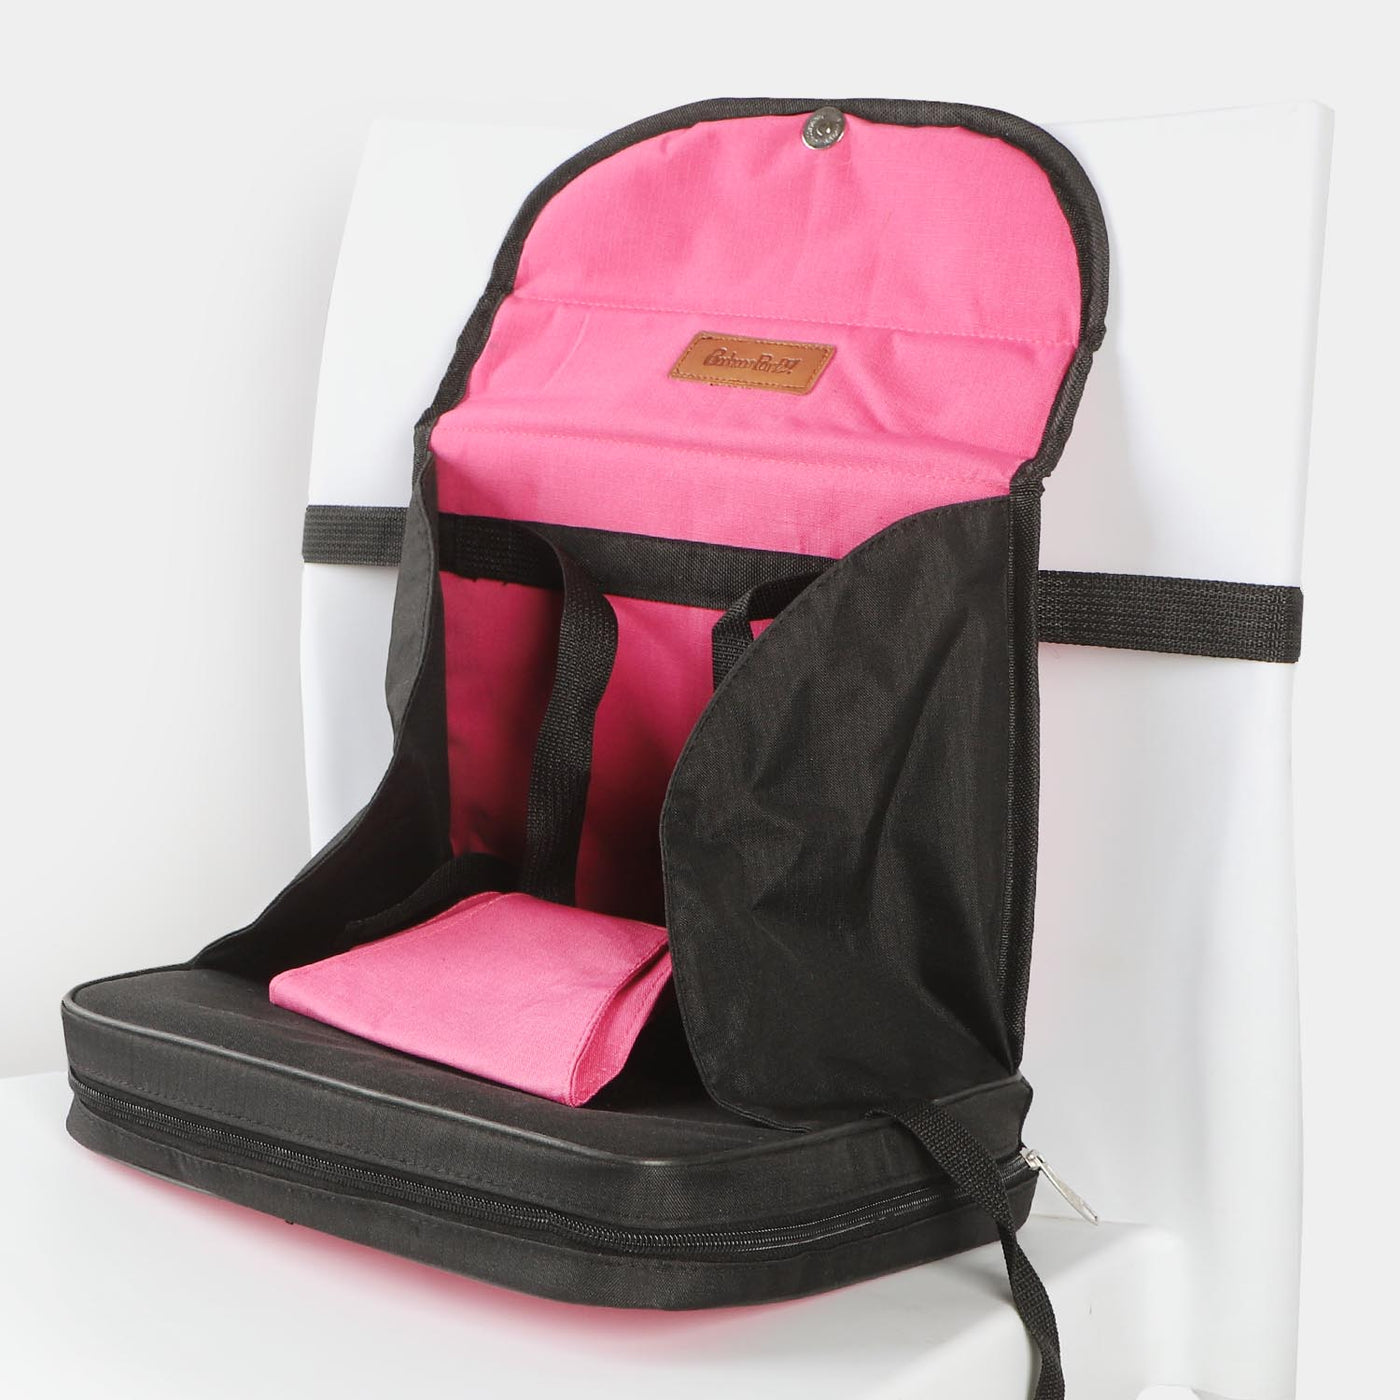 Portable Booster Seat For Kids